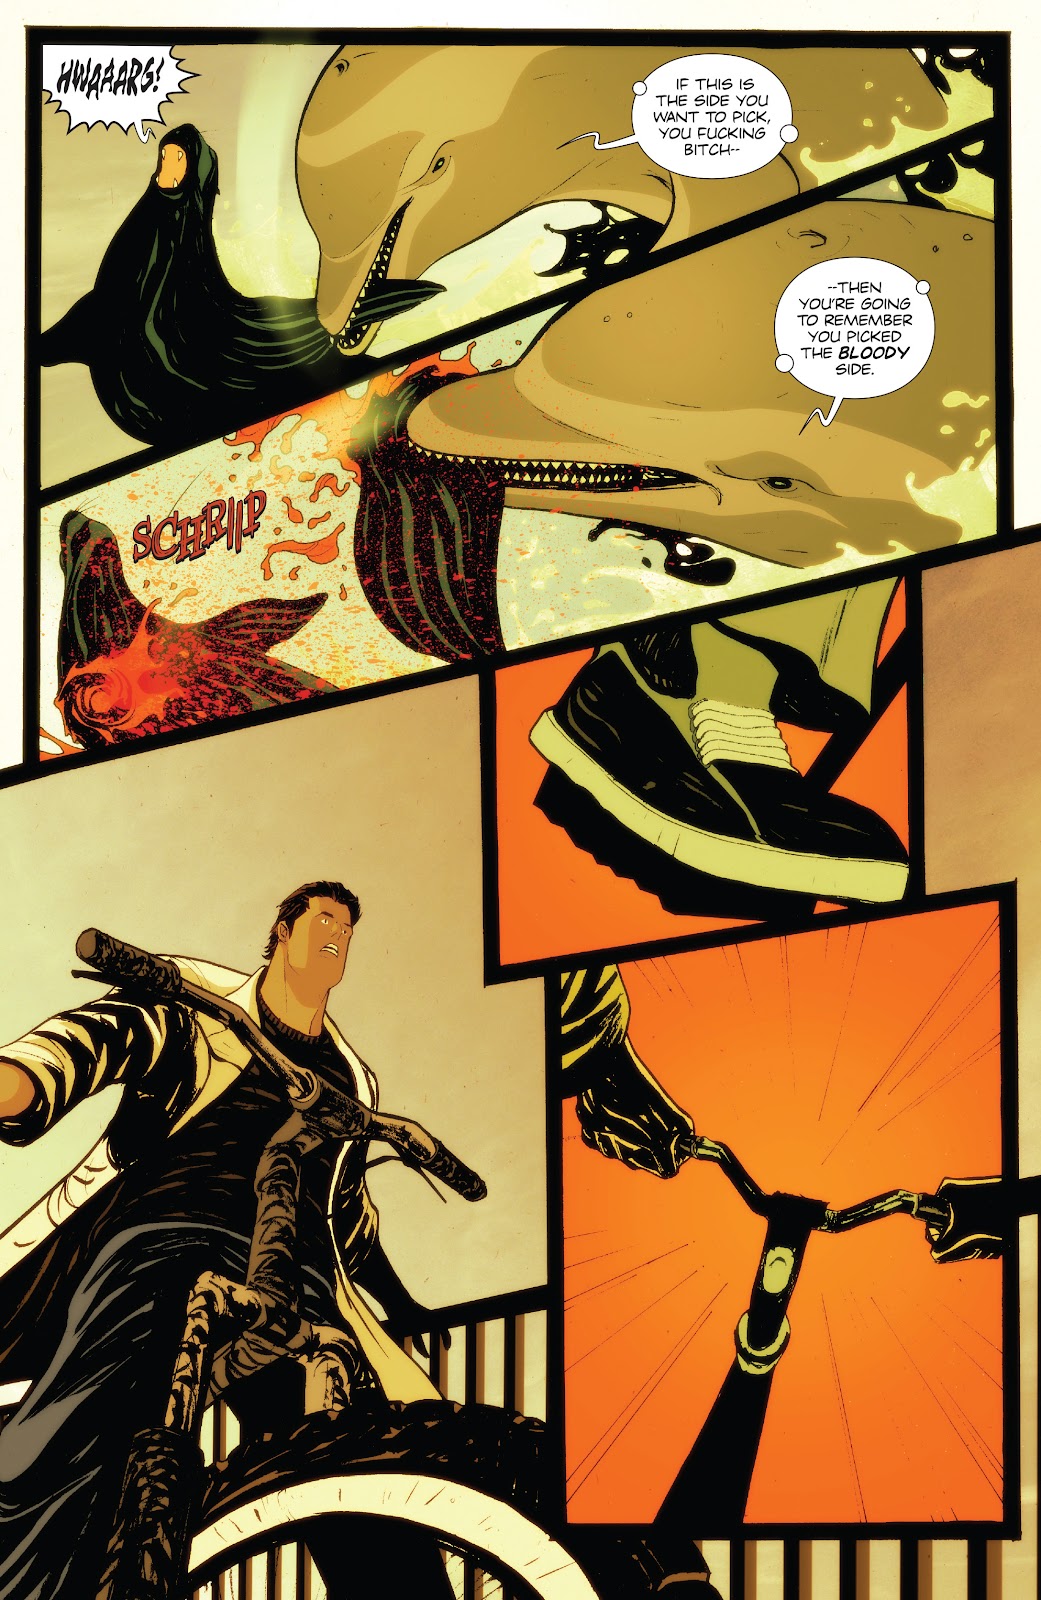 Animosity: The Rise issue 1 - Page 8